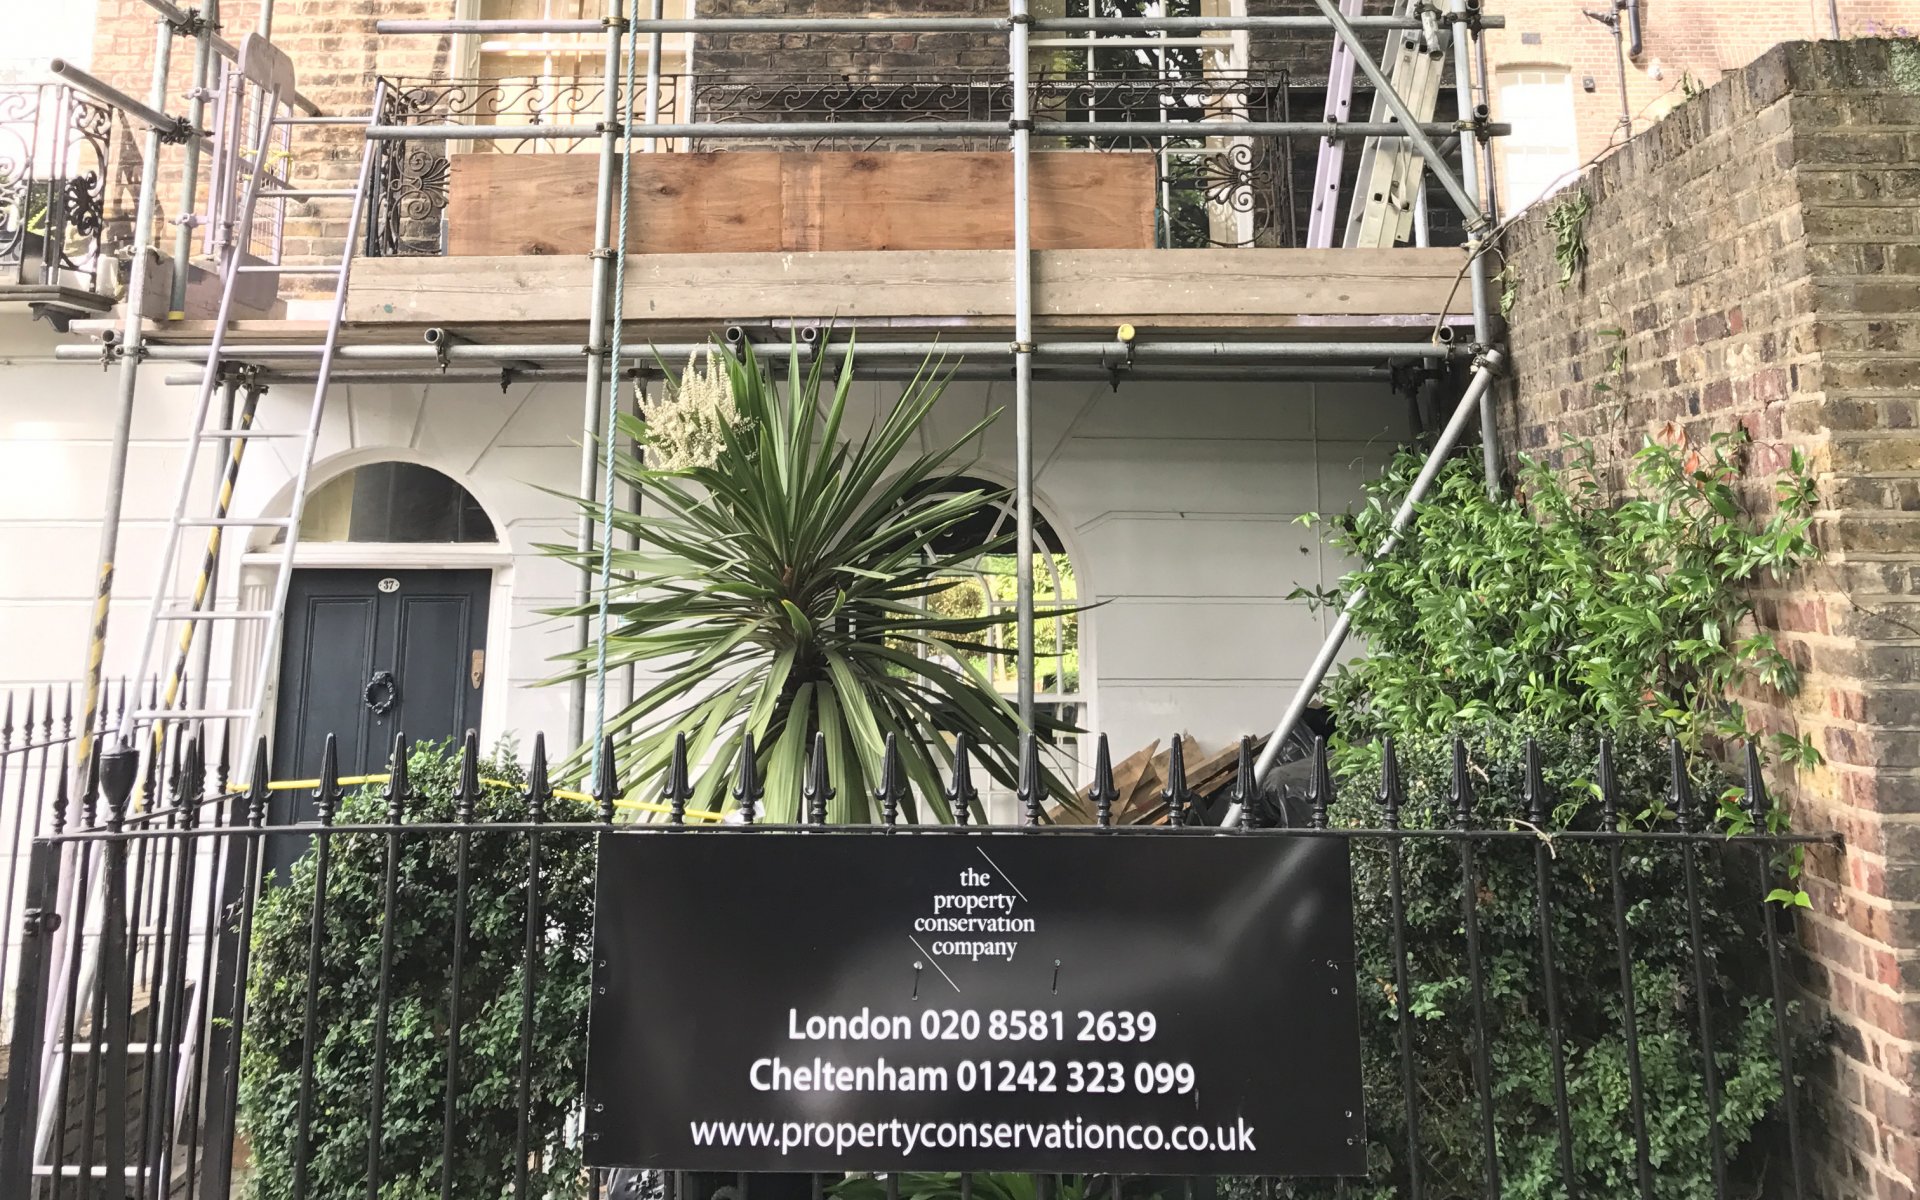 Complete external renovation of a Grade II listed building in Islington